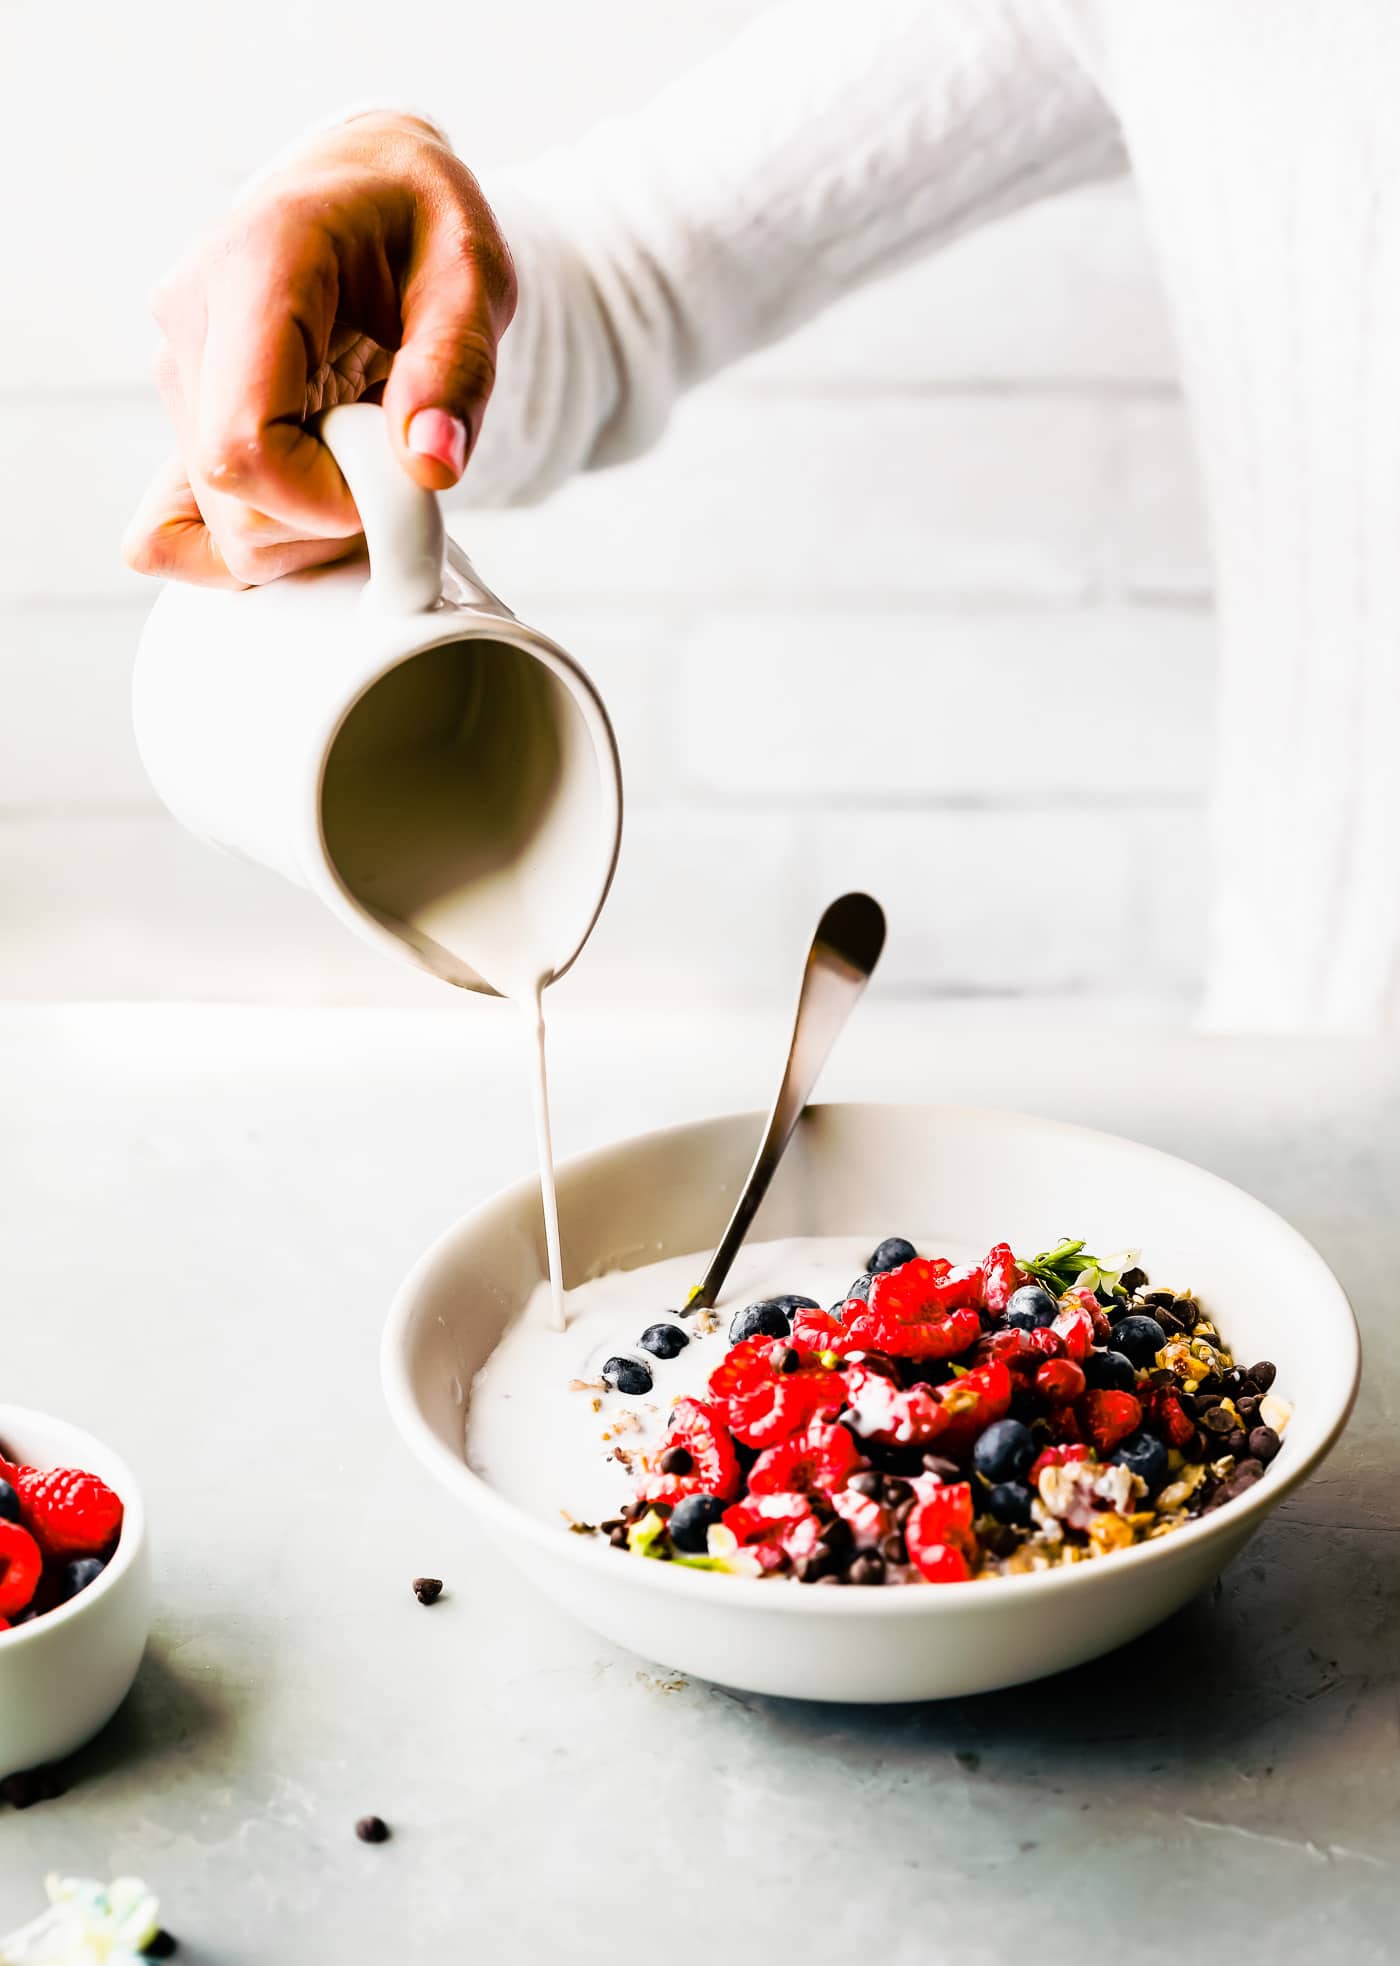 Milk from a small white pitcher being poured into a white bowl filled with oats, quinoa, chia seeds for a breakfast bowl, topped with berries and chocolate chips.